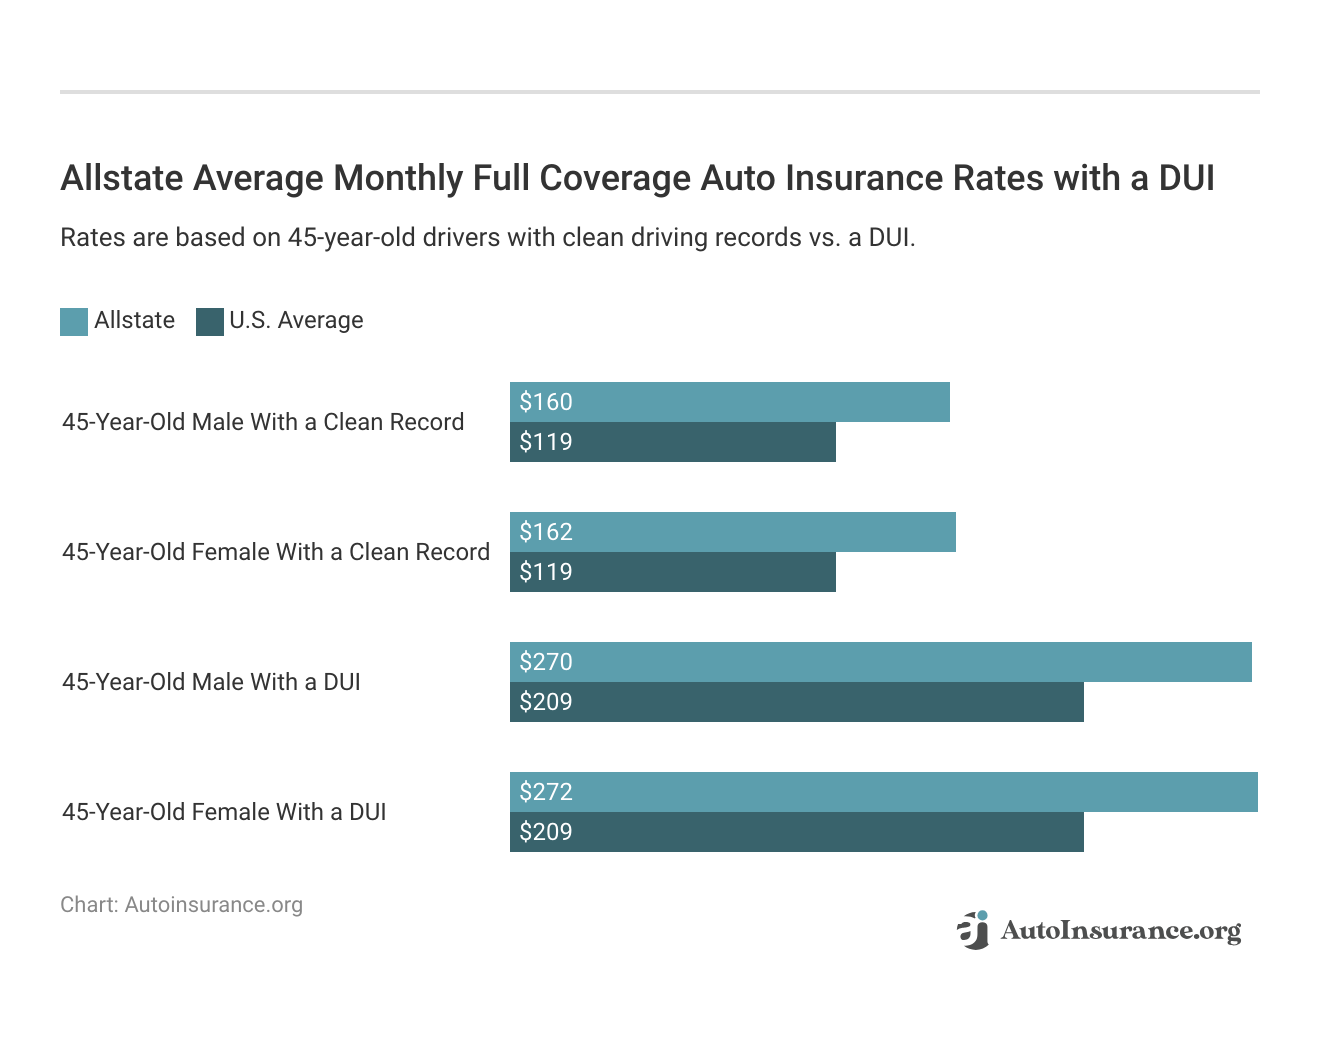 Allstate Average Monthly Full Coverage Auto Insurance Rates With a DUI